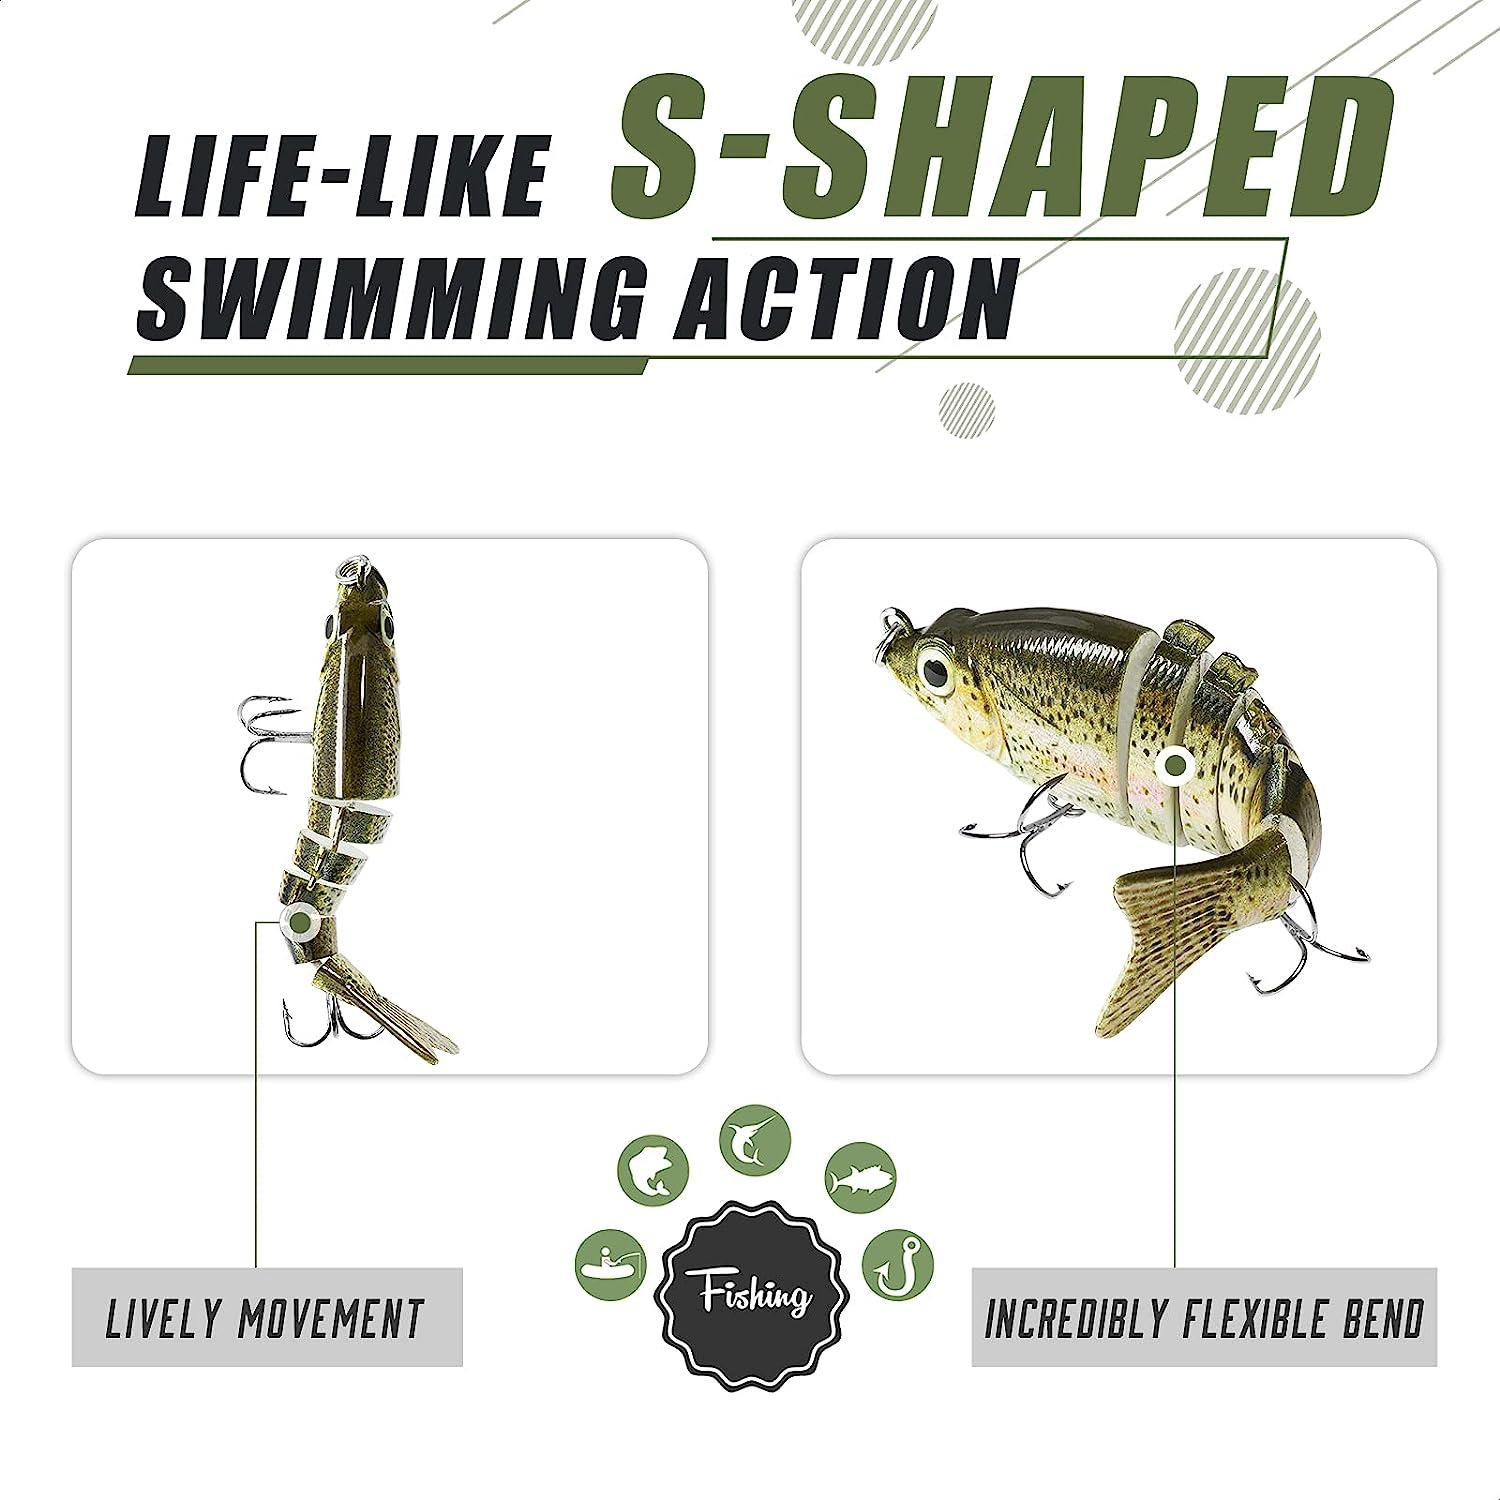  TRUSCEND Fishing Lures for Bass Trout Segmented Multi Jointed  Swimbaits Slow Sinking Swimming Lures for Freshwater Saltwater Fishing Lures  Kit : Sports & Outdoors